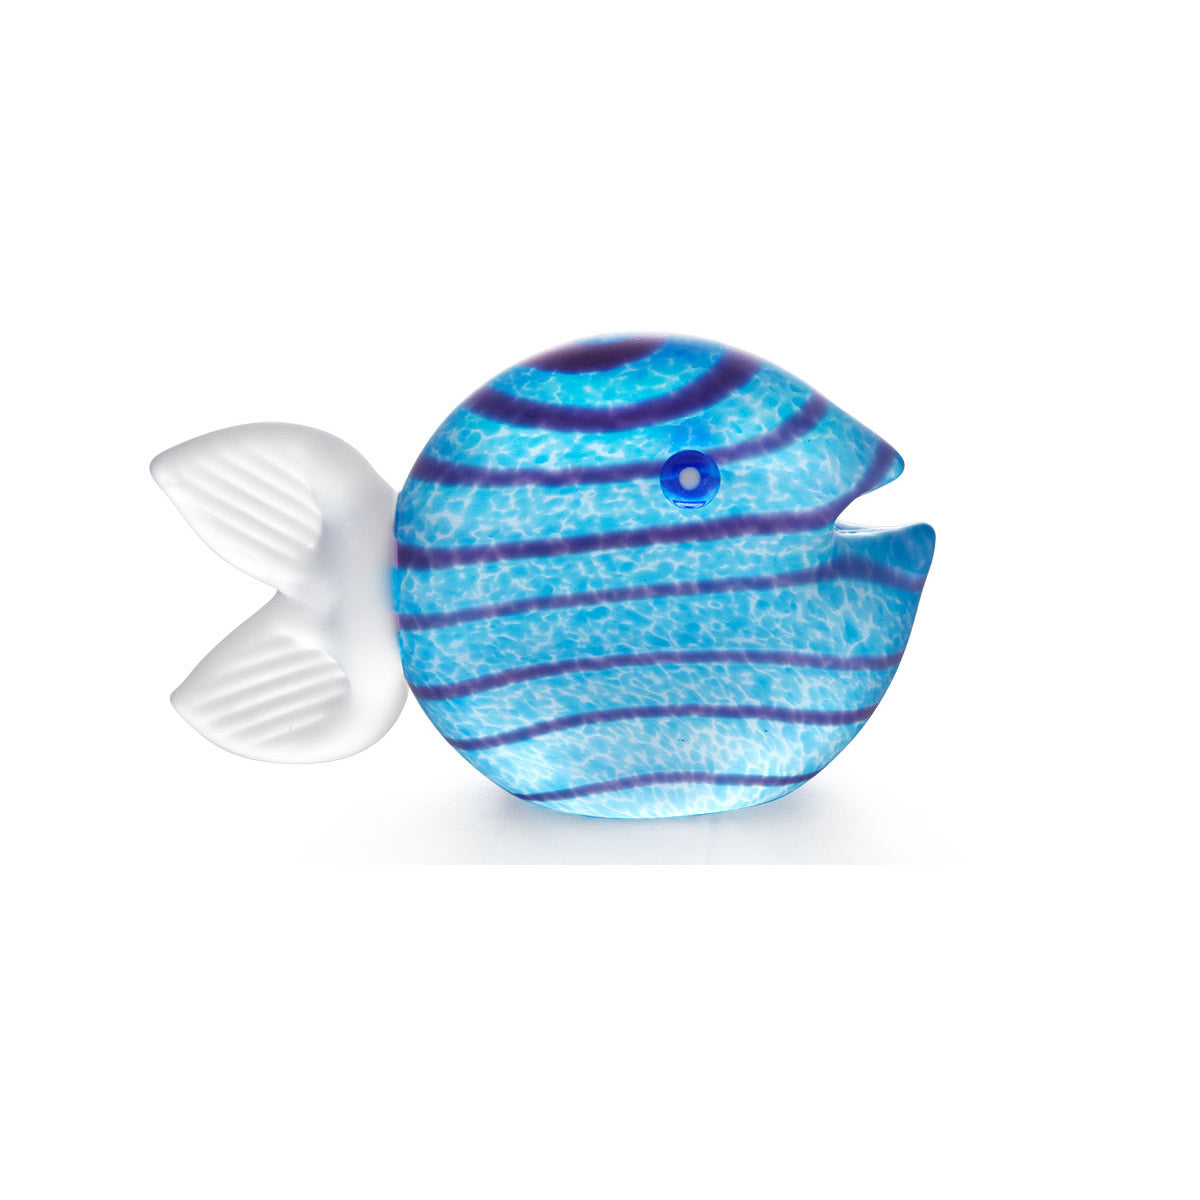 Snippy Fish Paperweight, Light Blue- by Borowski